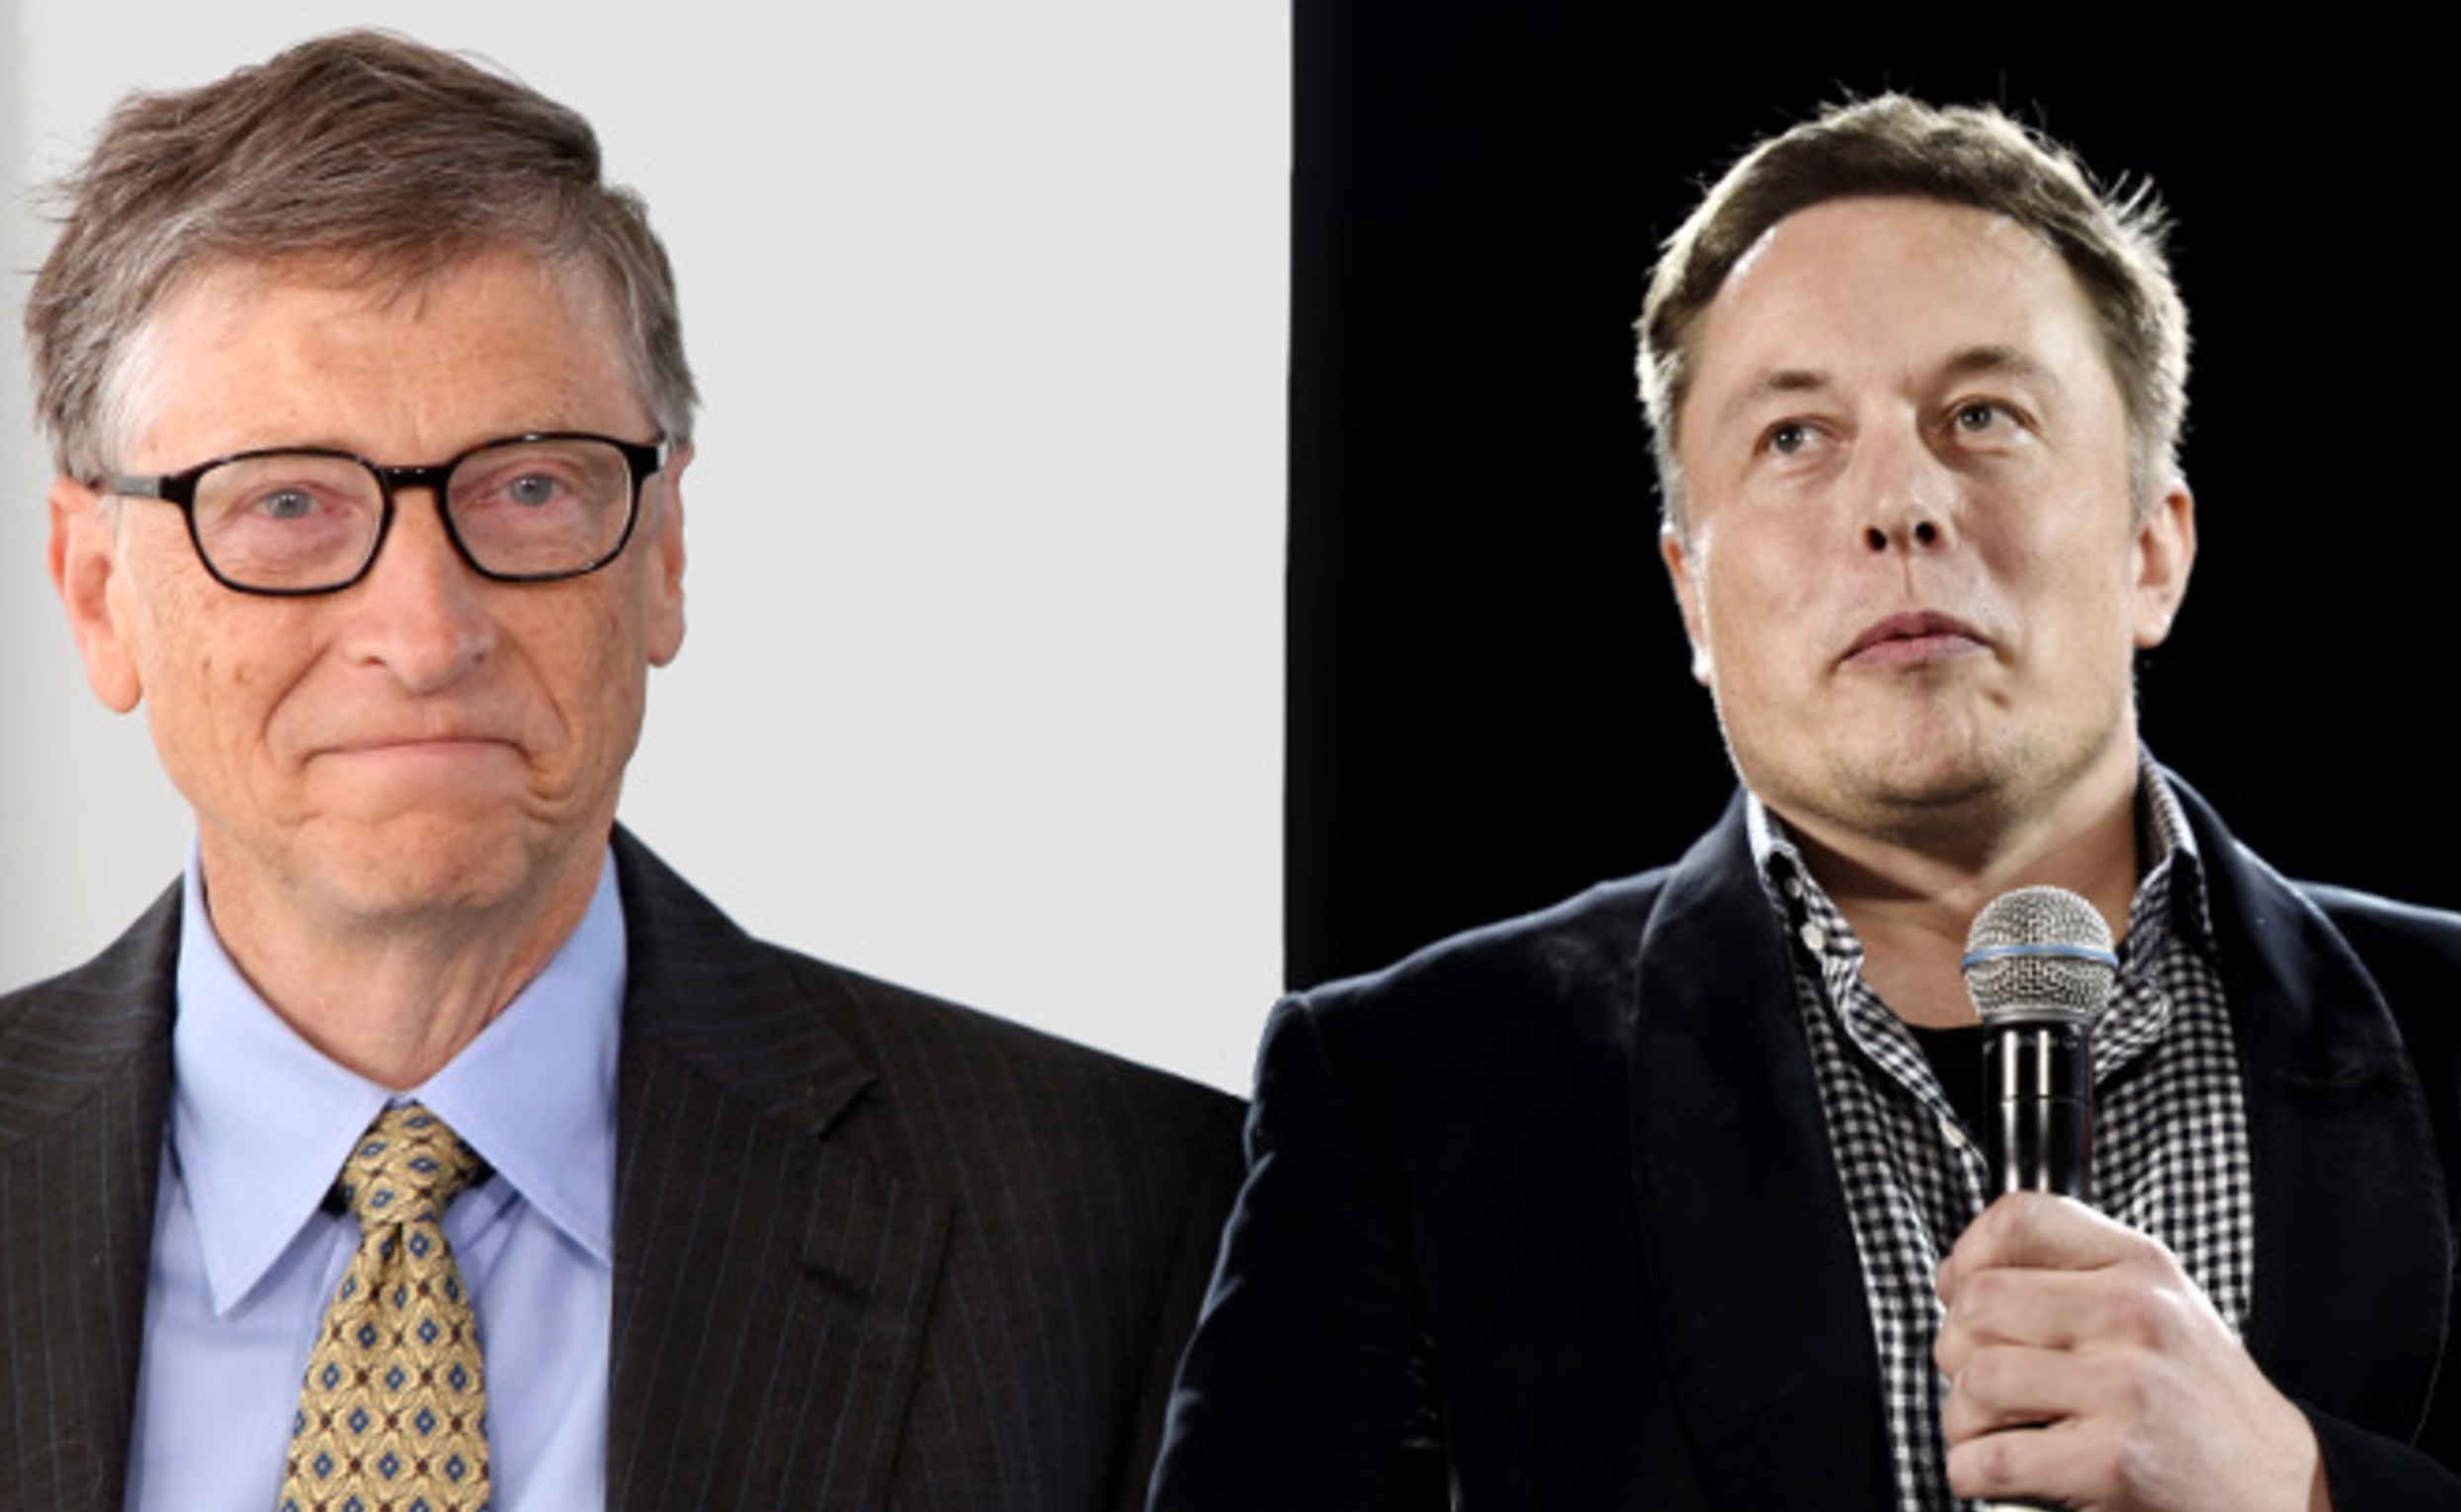 Bill Gates is skeptical about Elon Musk's vision for Twitter: “He could  make it worse”